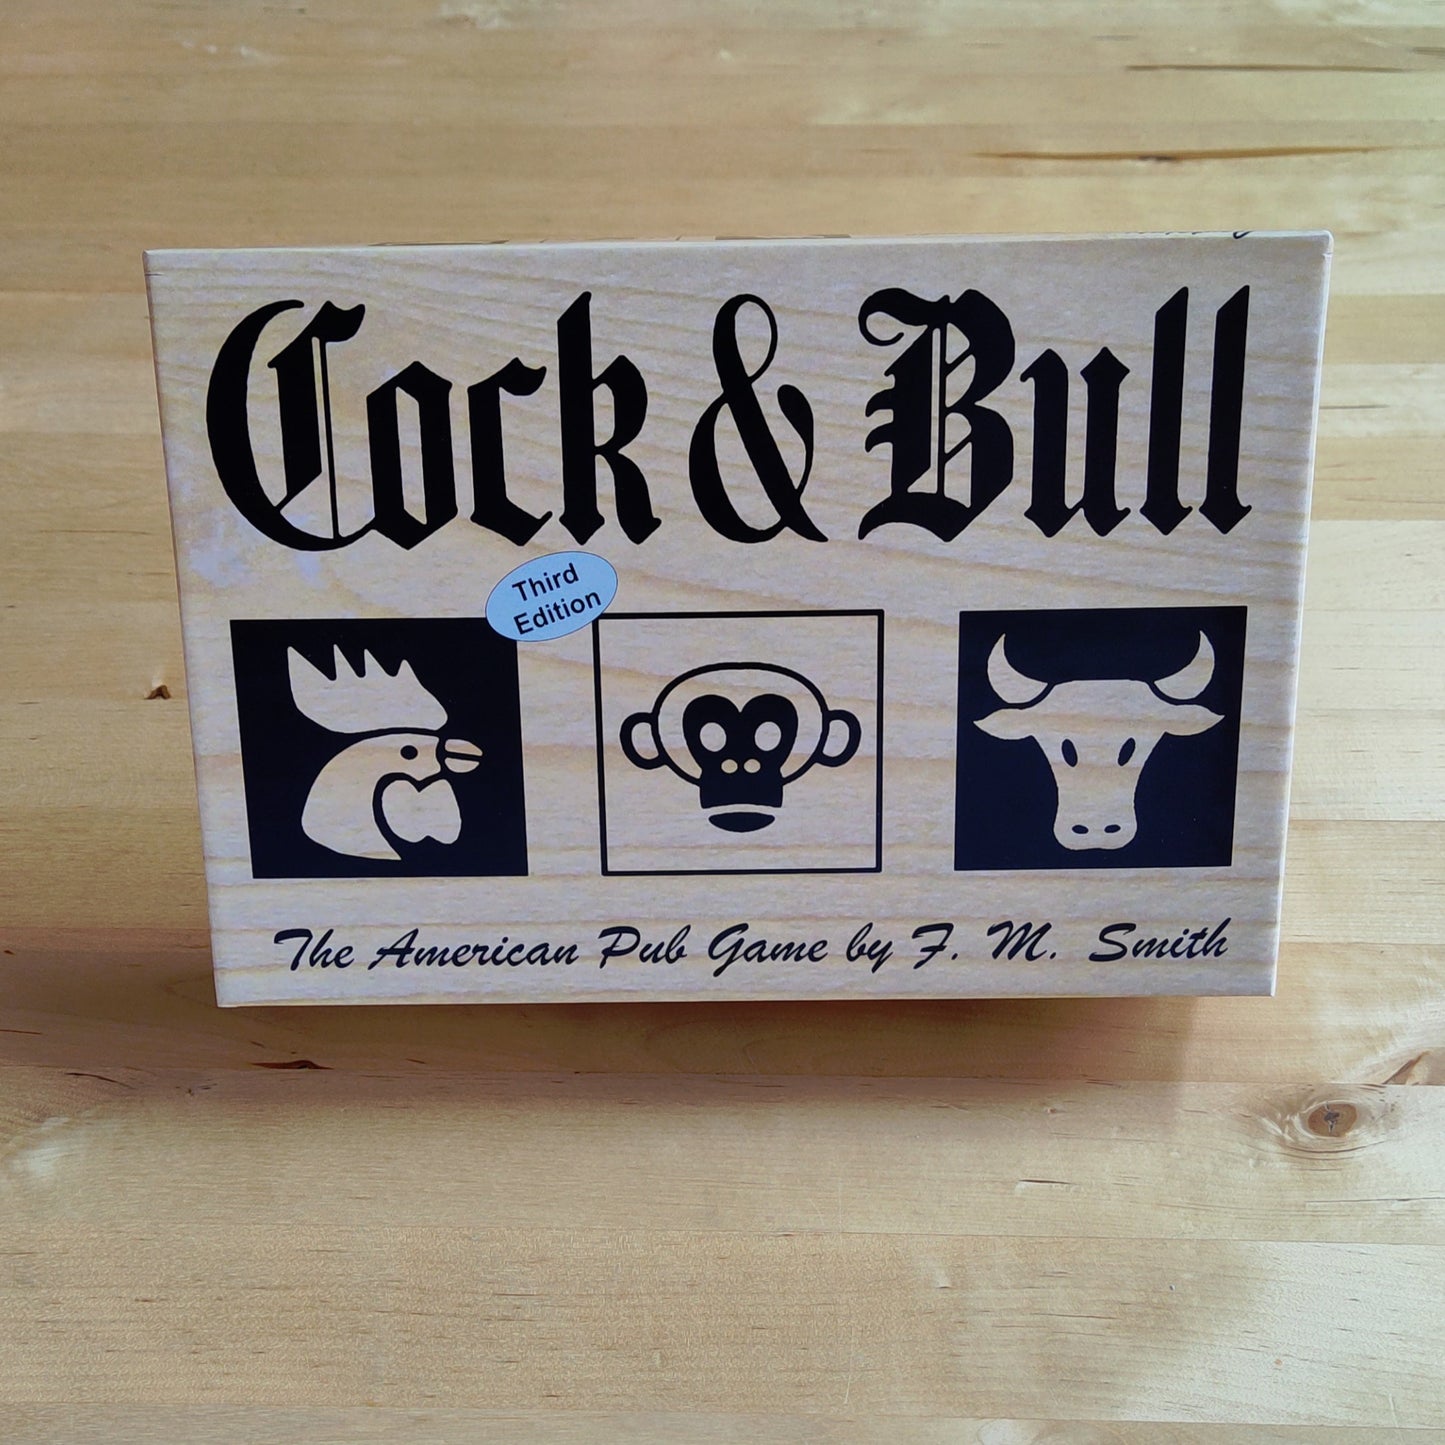 Cock and Bull: 3rd Edition